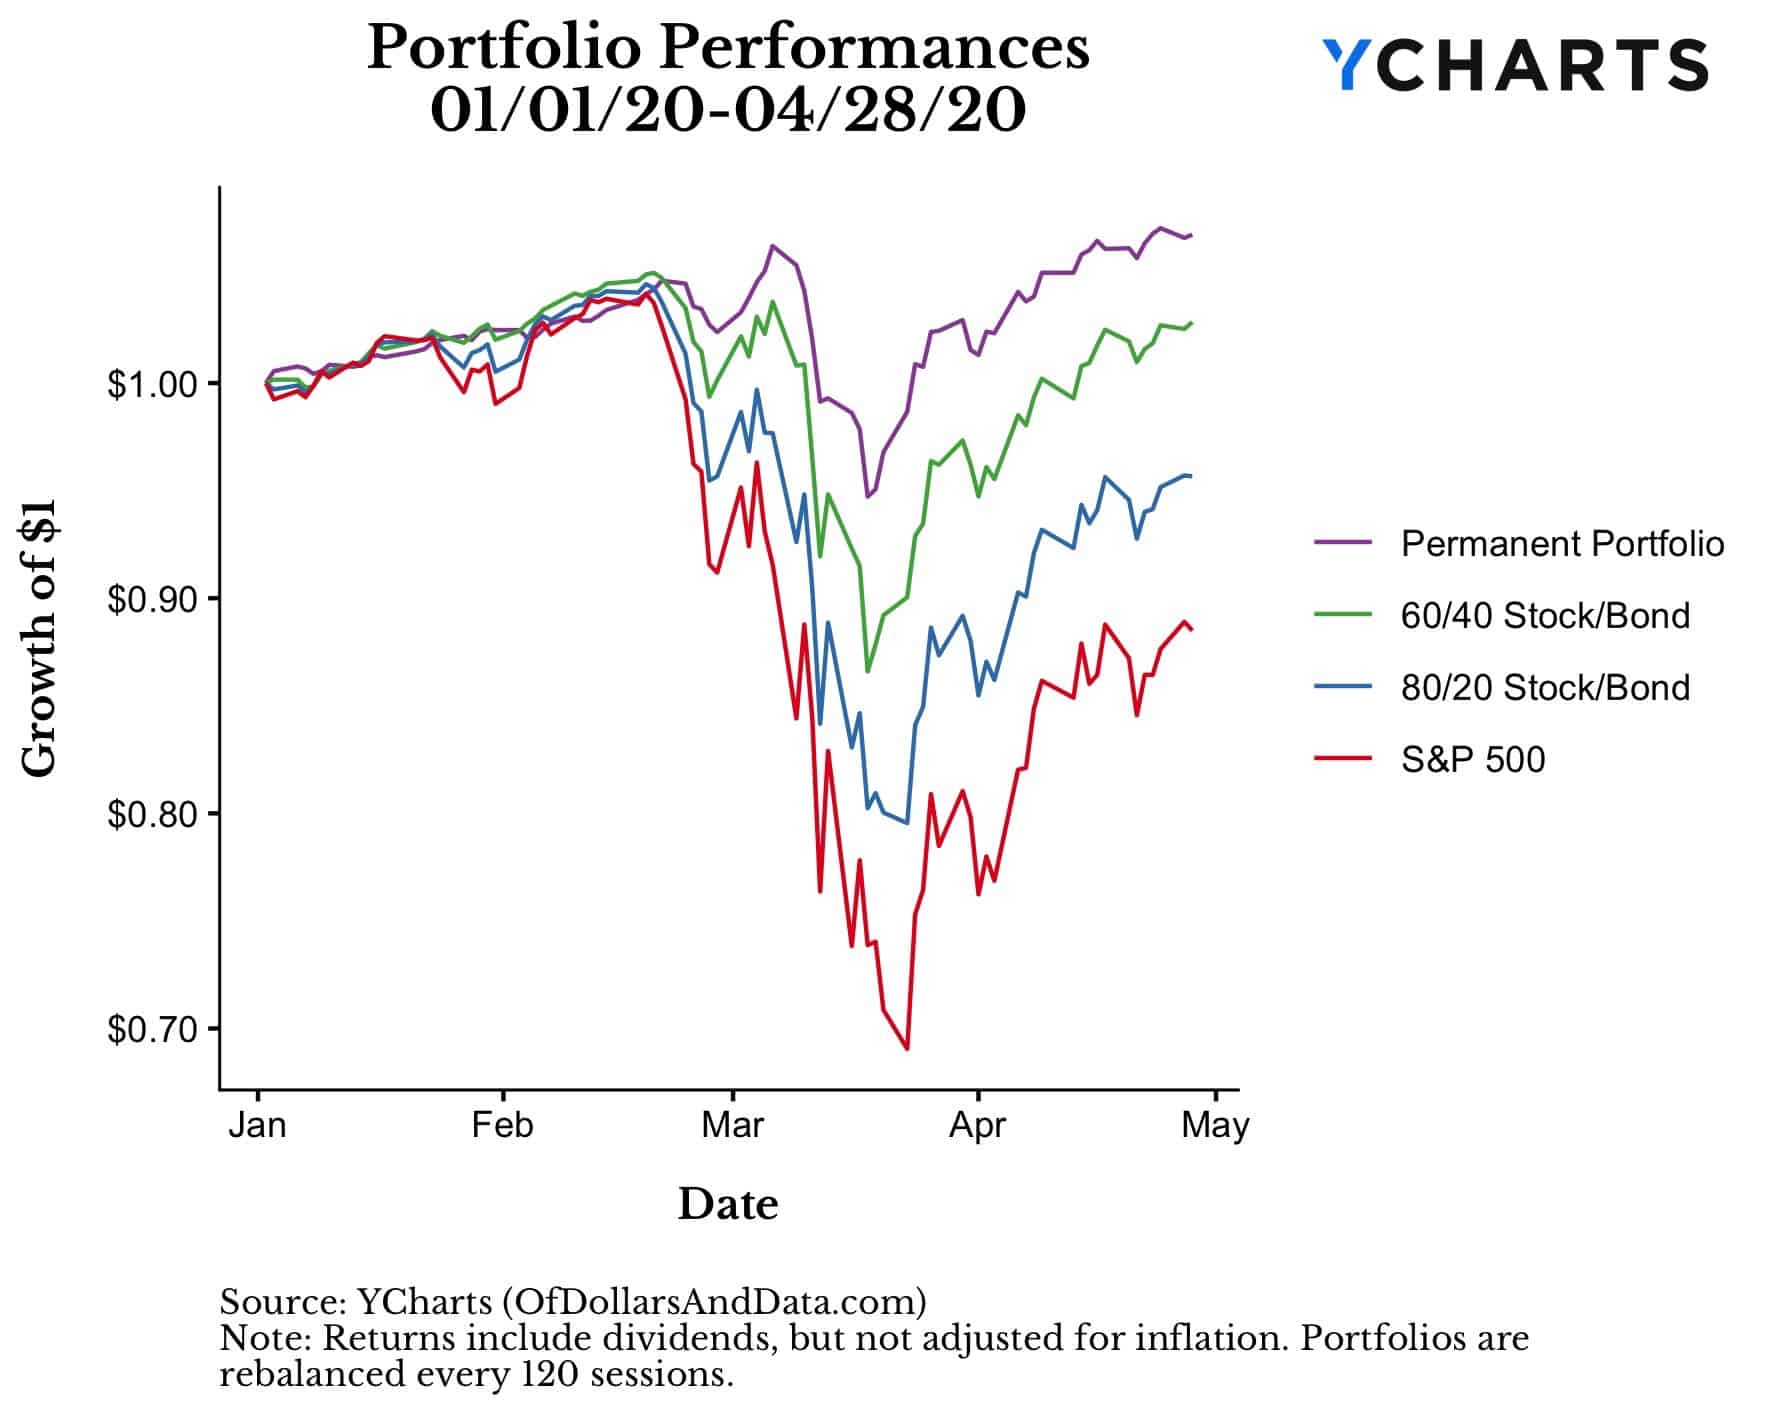 Early 2020 performance for the Permanent Portfolio, 60/40, 80/20, and the S&P 500